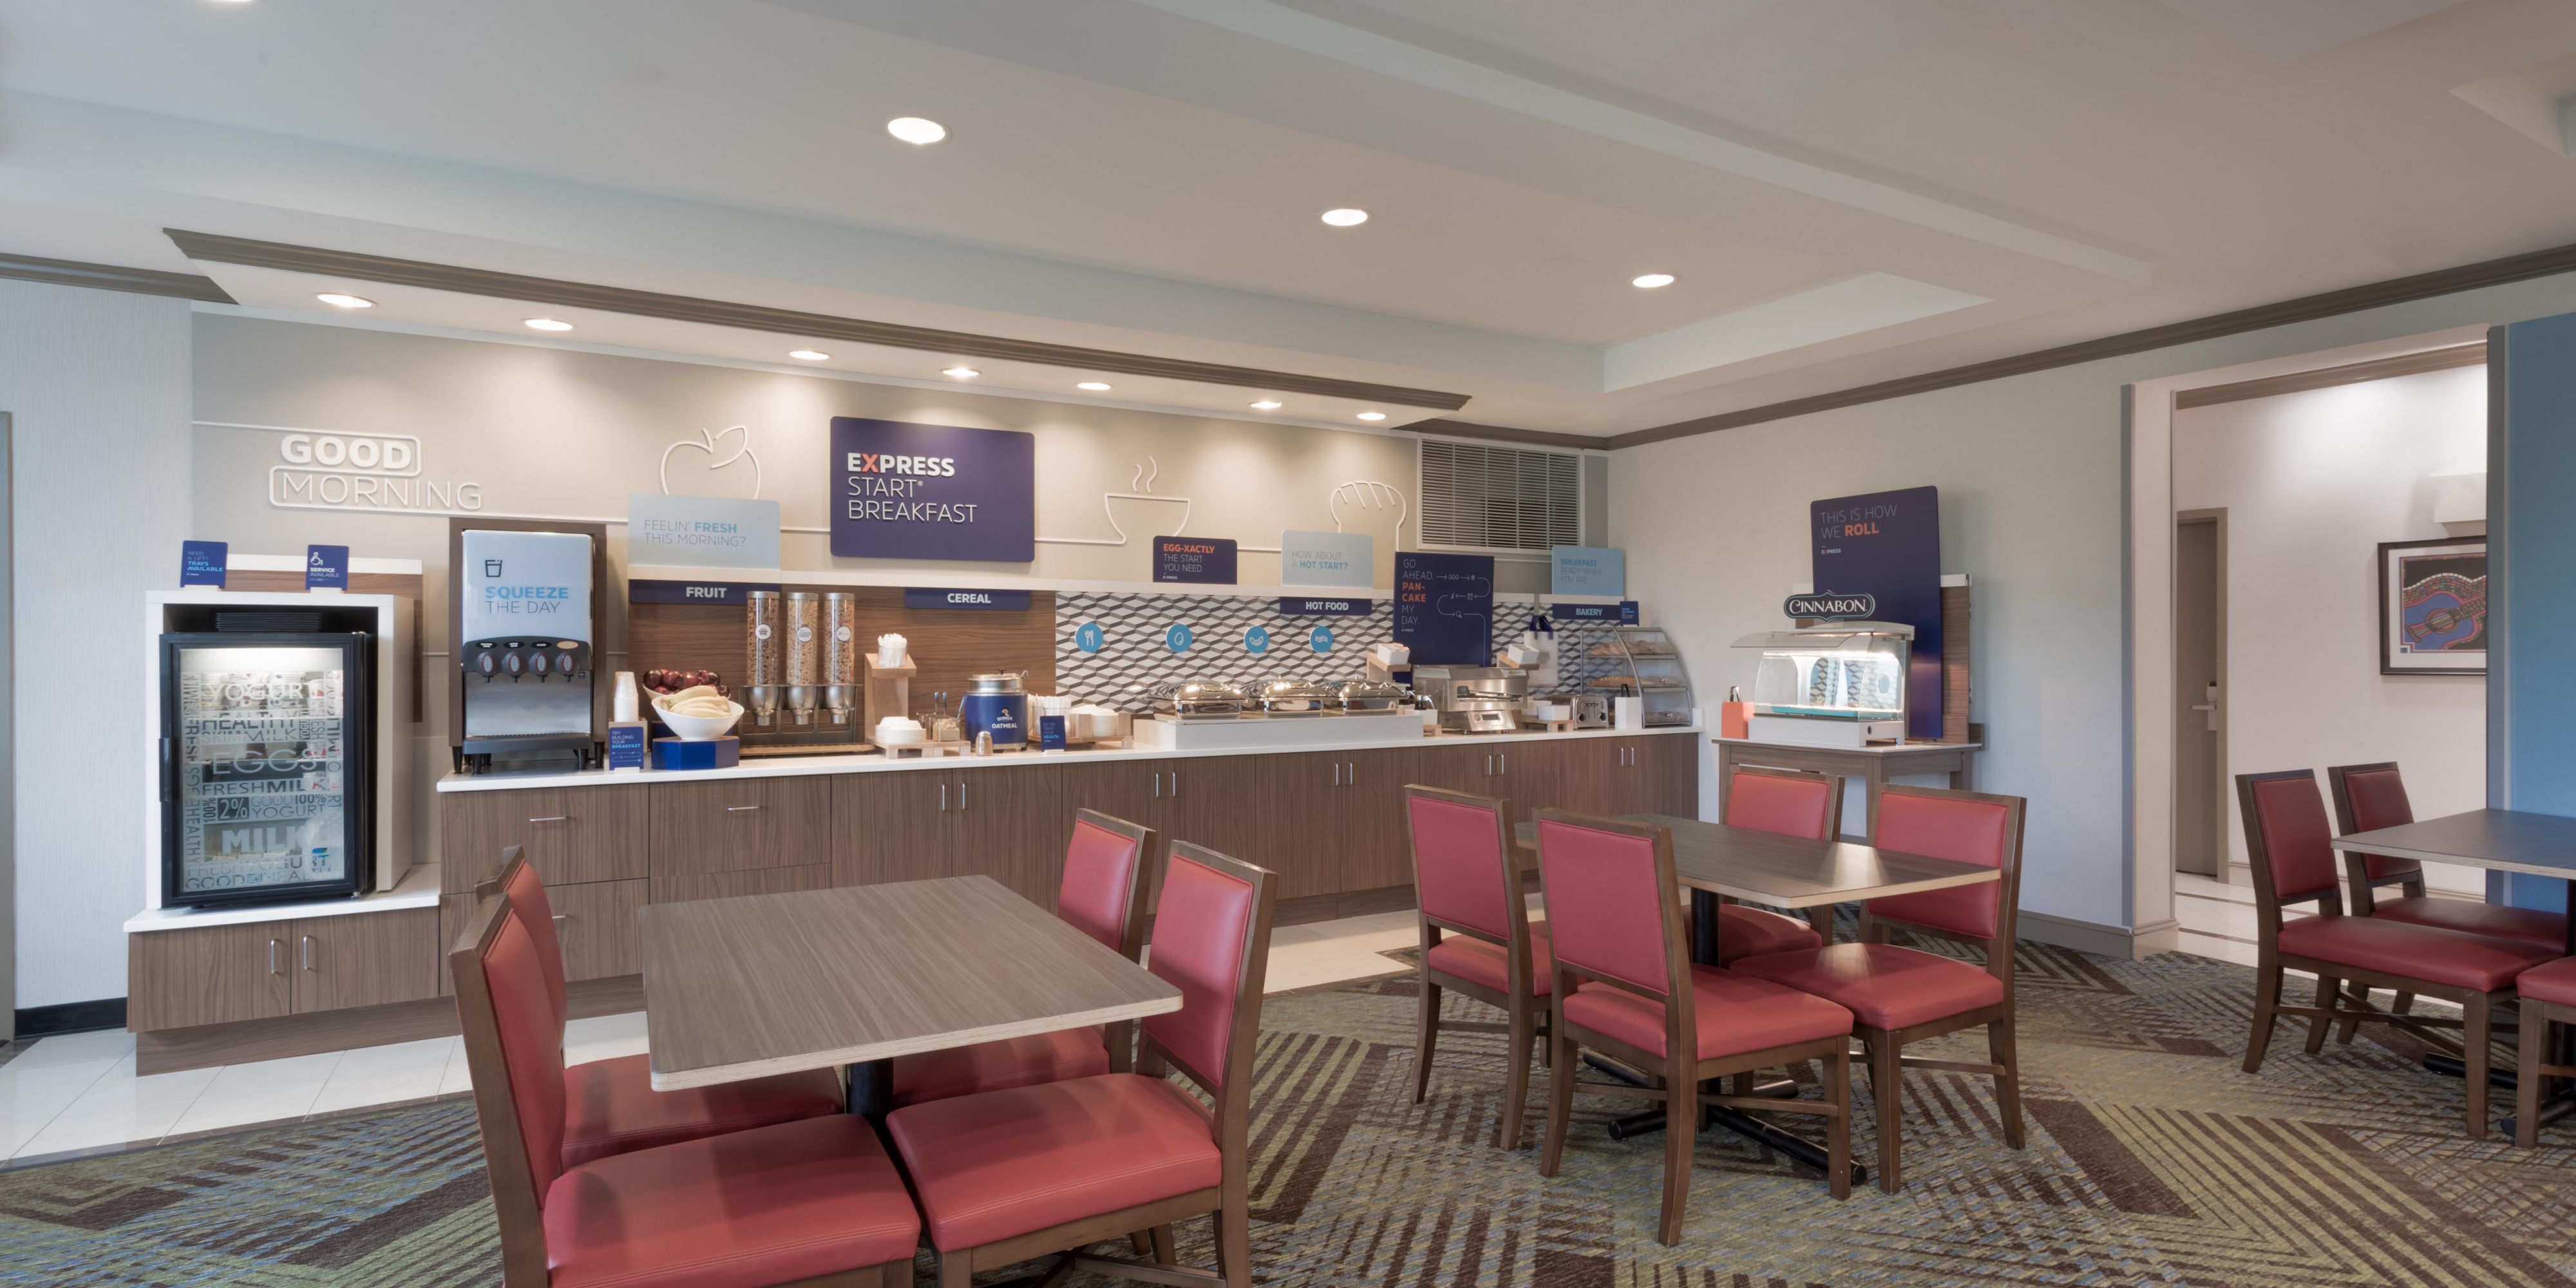 Our hotel features complimentary hot breakfast with a wide variety of options. Continental items fill the buffet daily along with 2-3 hot items. We also have fresh baked cinnamon rolls and a pancake station!